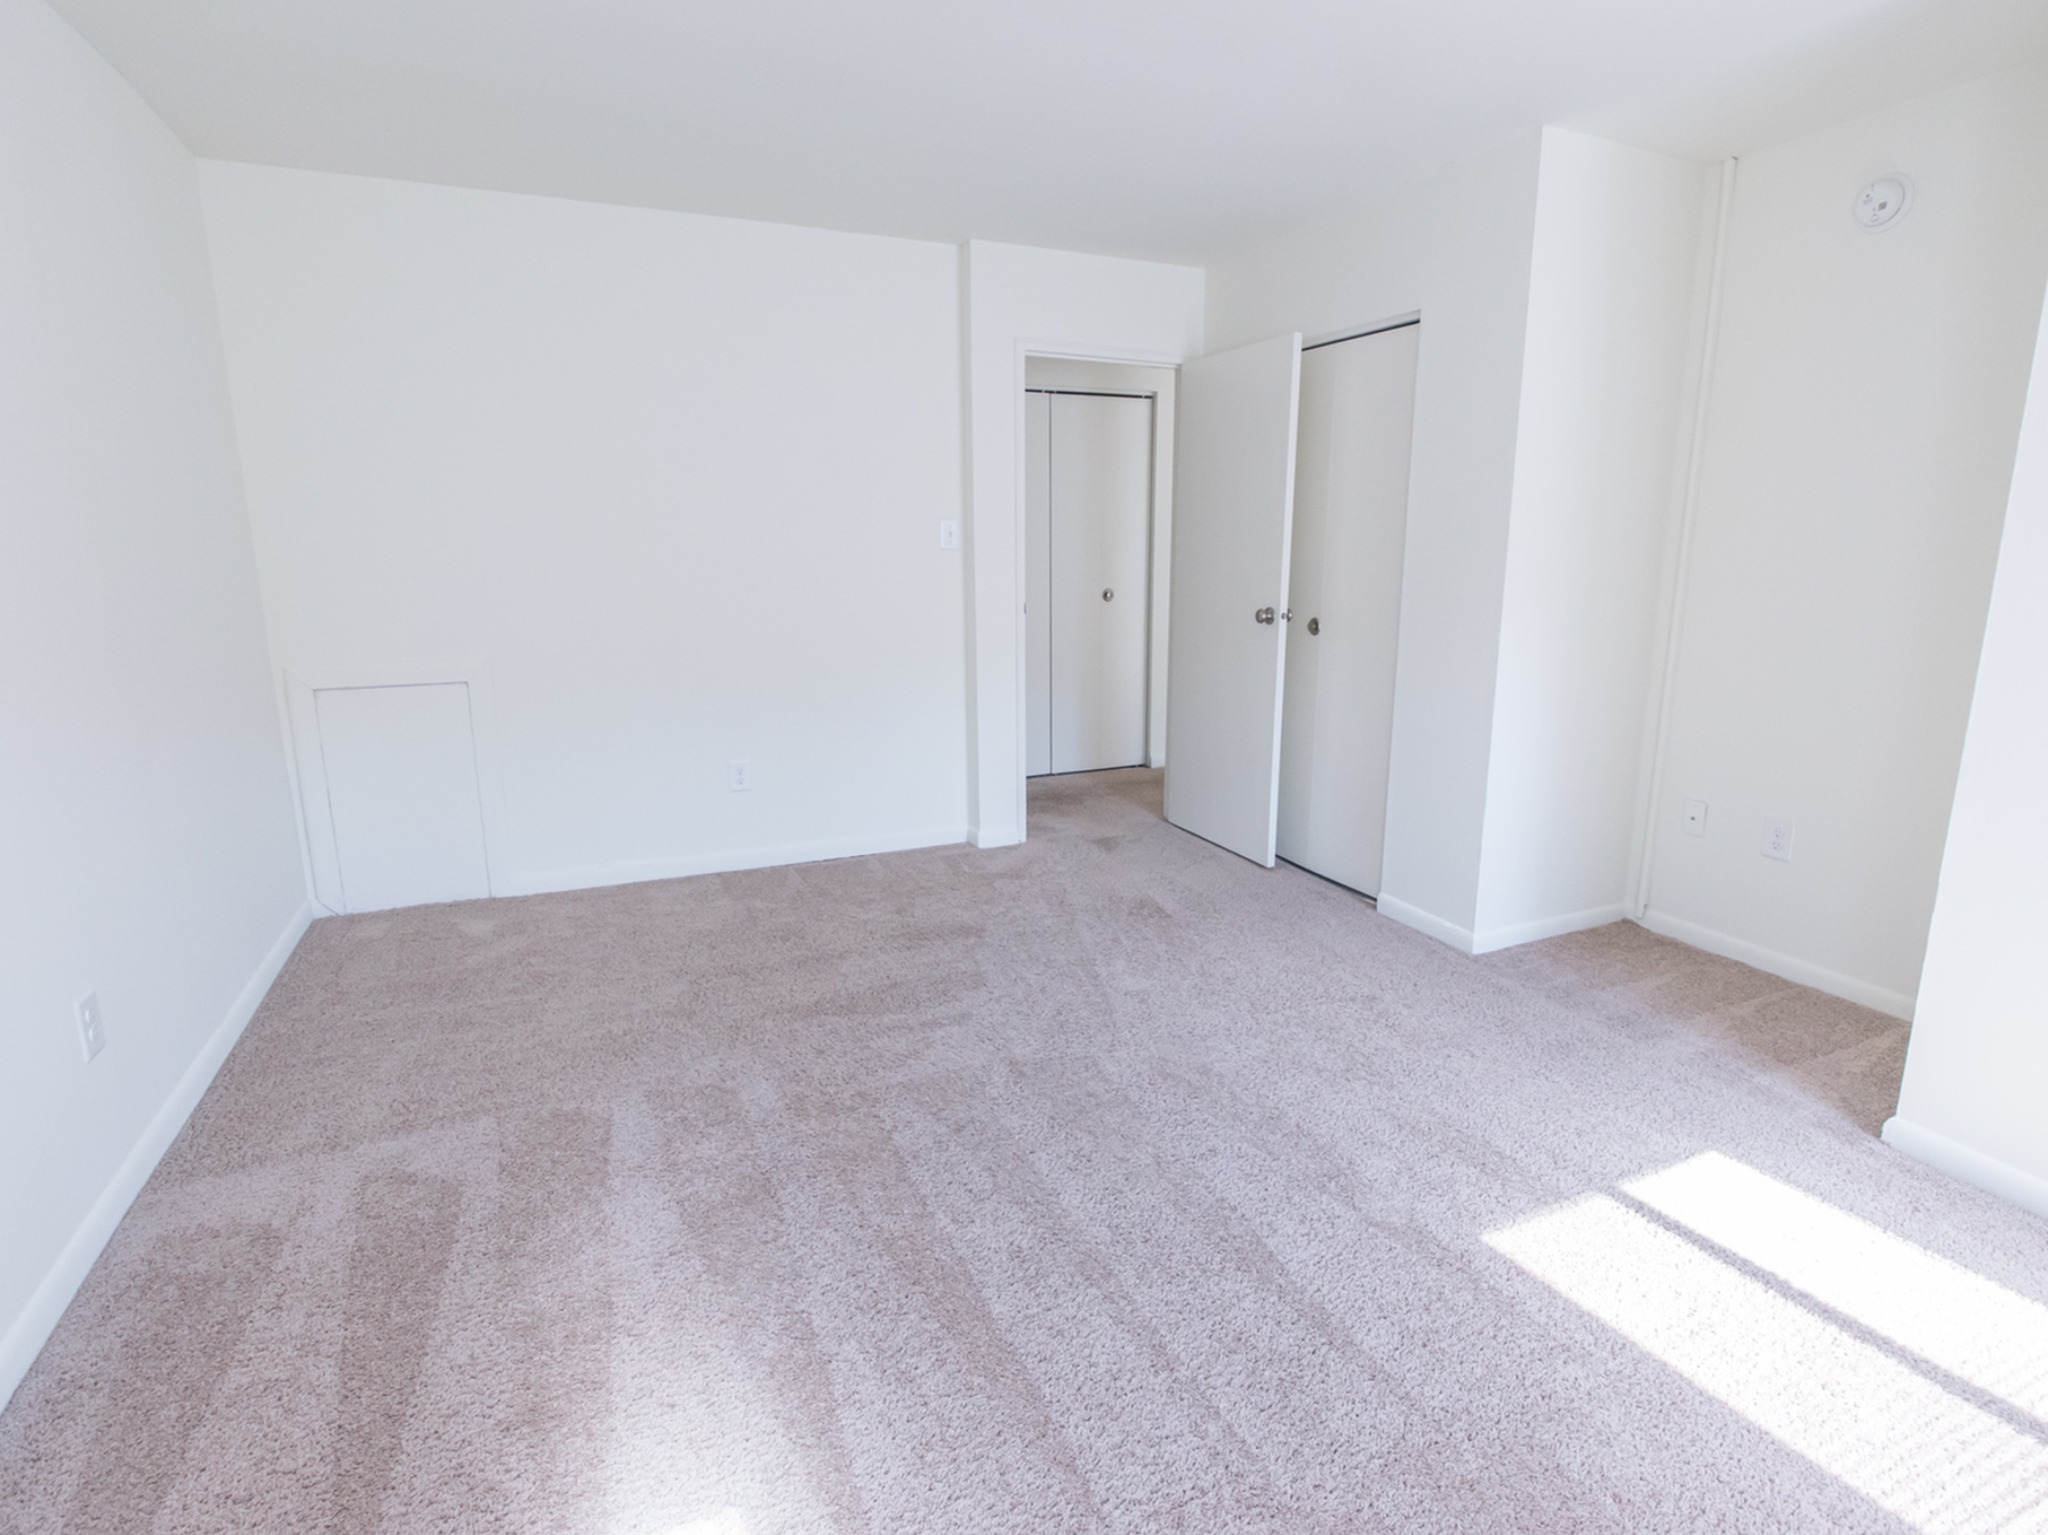 Bedroom area of an apartment unfurnished, fitted with carpet flooring, spacious closets, and a high ceiling